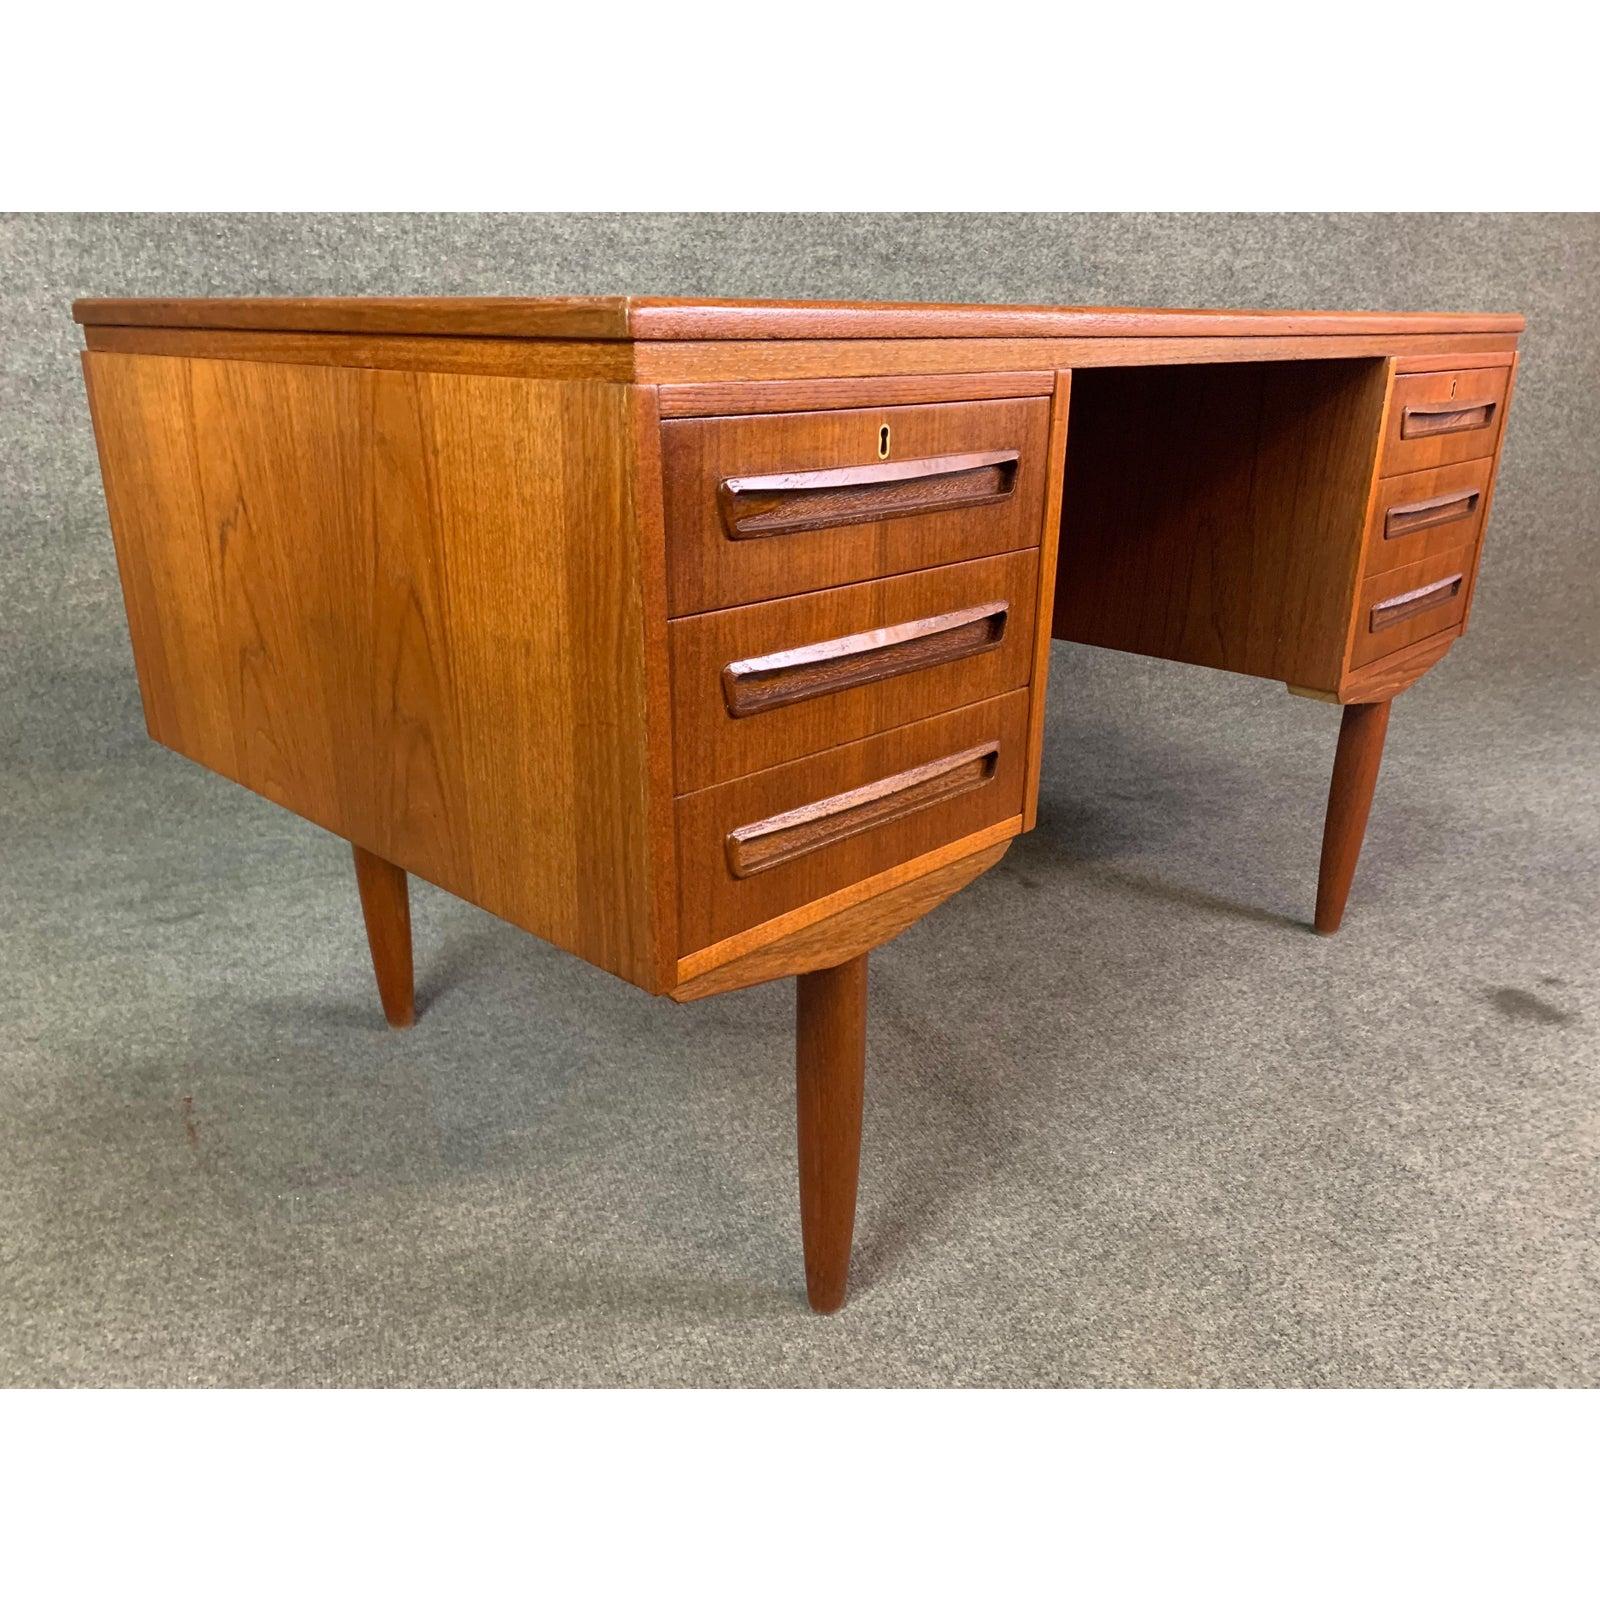 Here is a beautiful Scandinavian Modern executive desk in teak wood designed in the 1960s by J. Svenstrup and manufactured by Andreas Pedersen Møbelfabrik in Denmark.
This stunning desk, recently imported from Copenhagen to California before its